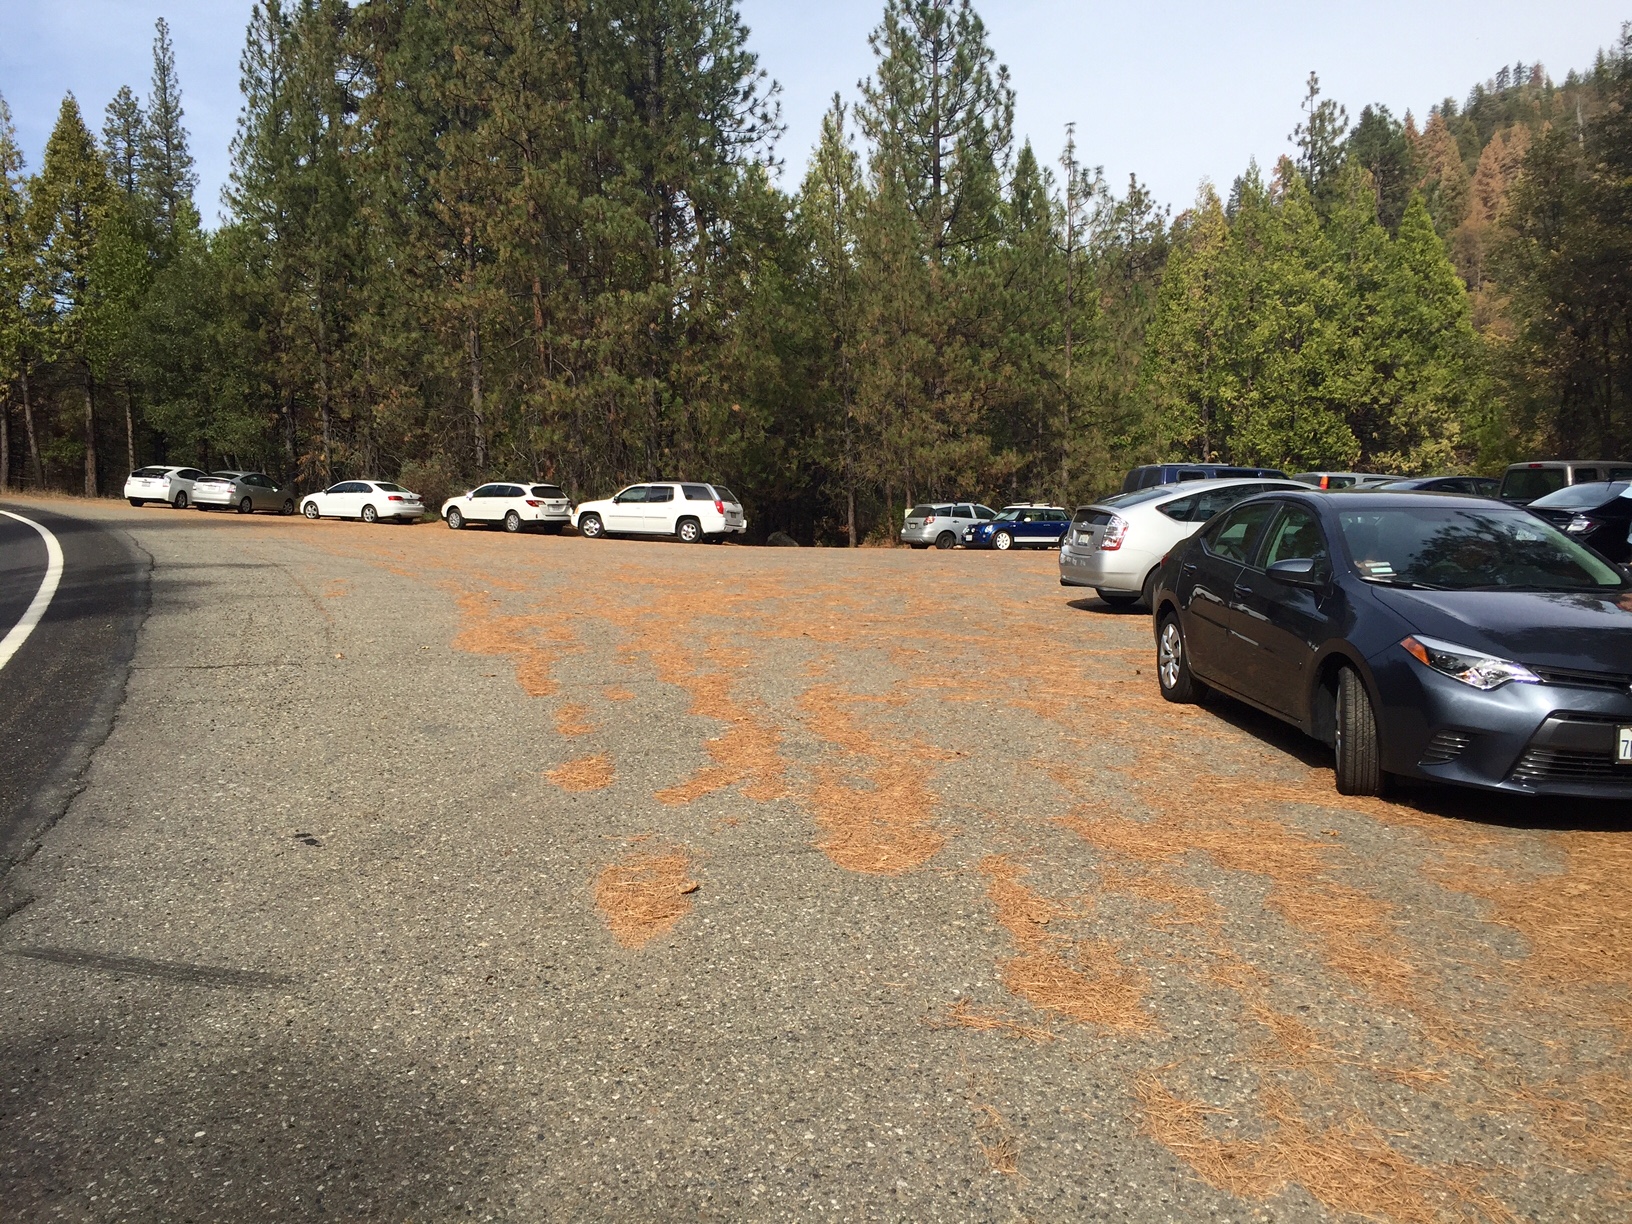 The parking area at Lewis Creek Trailhead